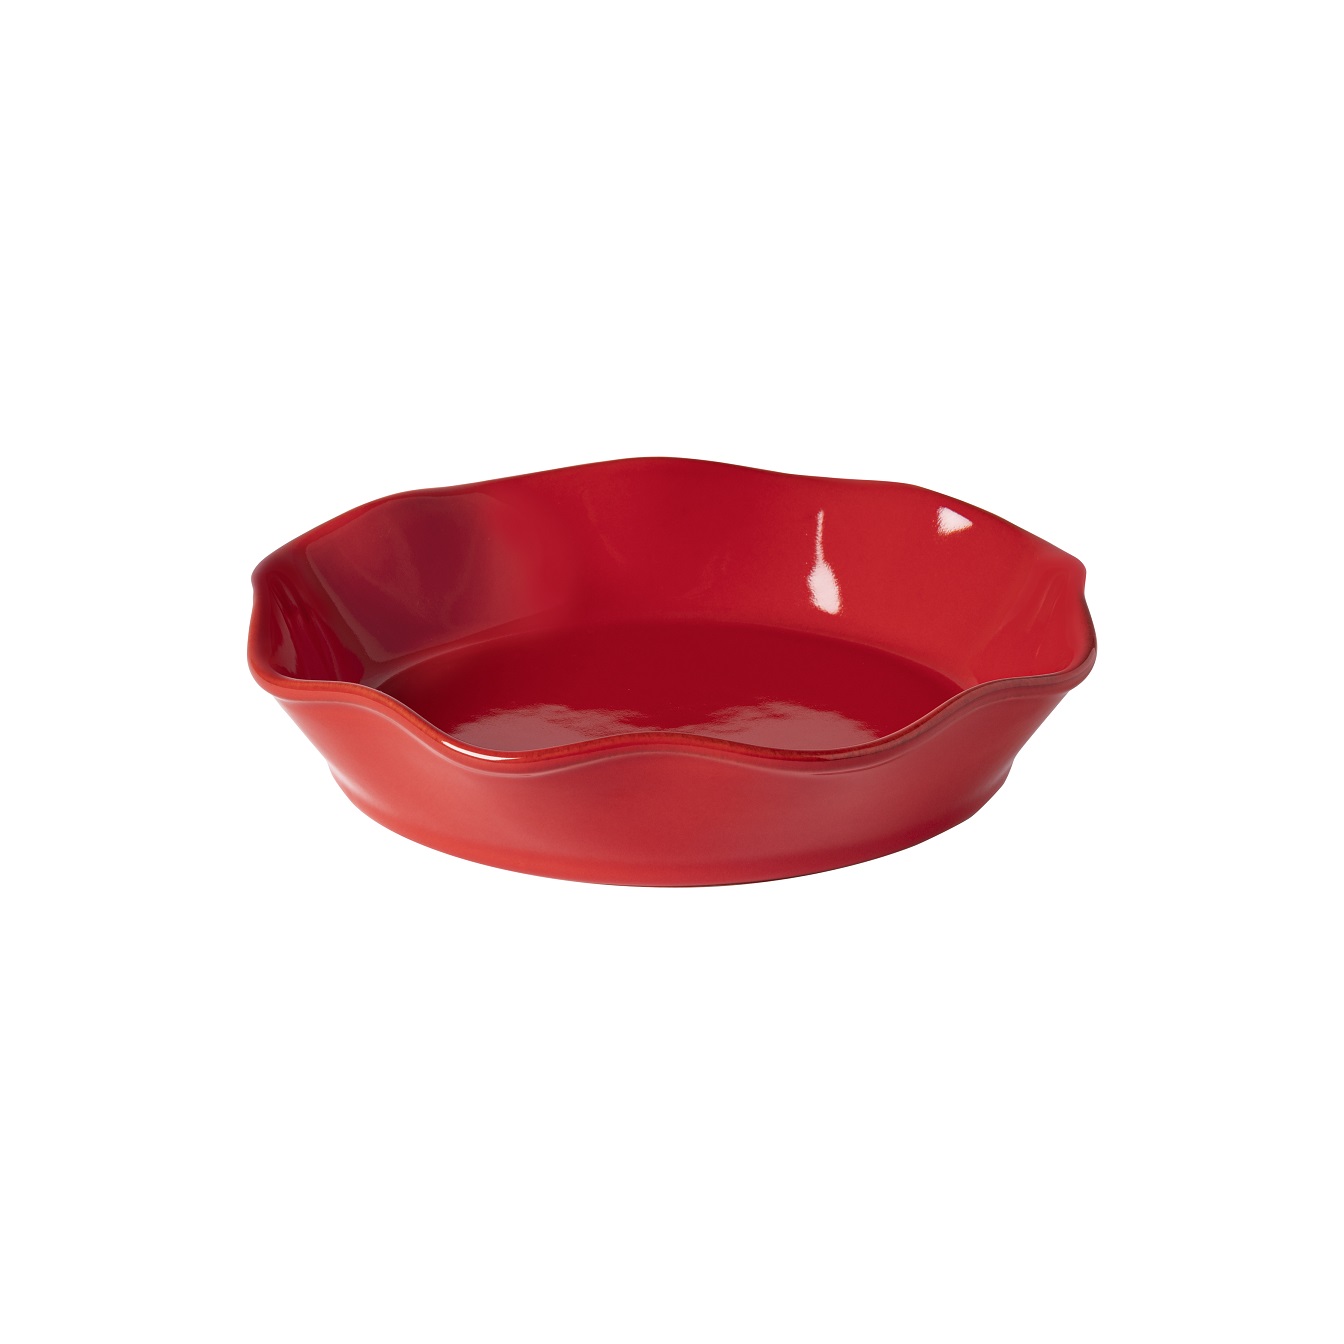 Cook & Host Red Soup/pasta Bowl 23cm Gift